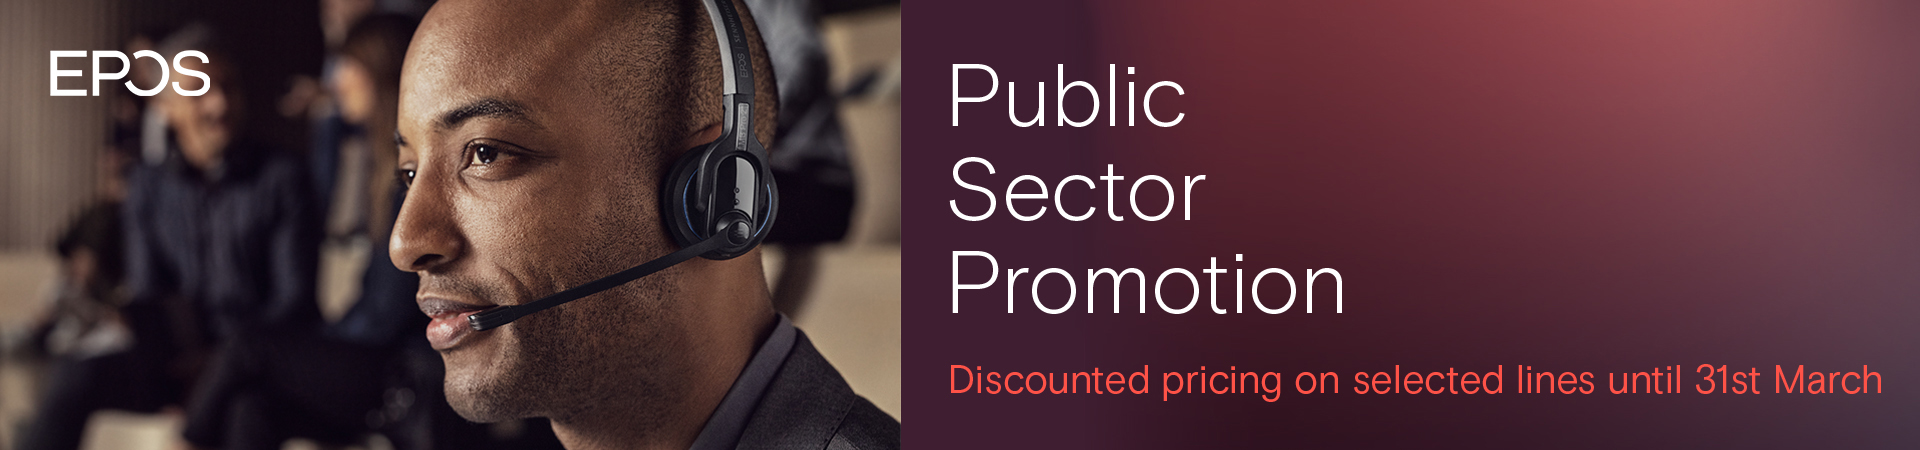 EPOS Public Sector Promotion - Discounted lines until 31st December from EPOS